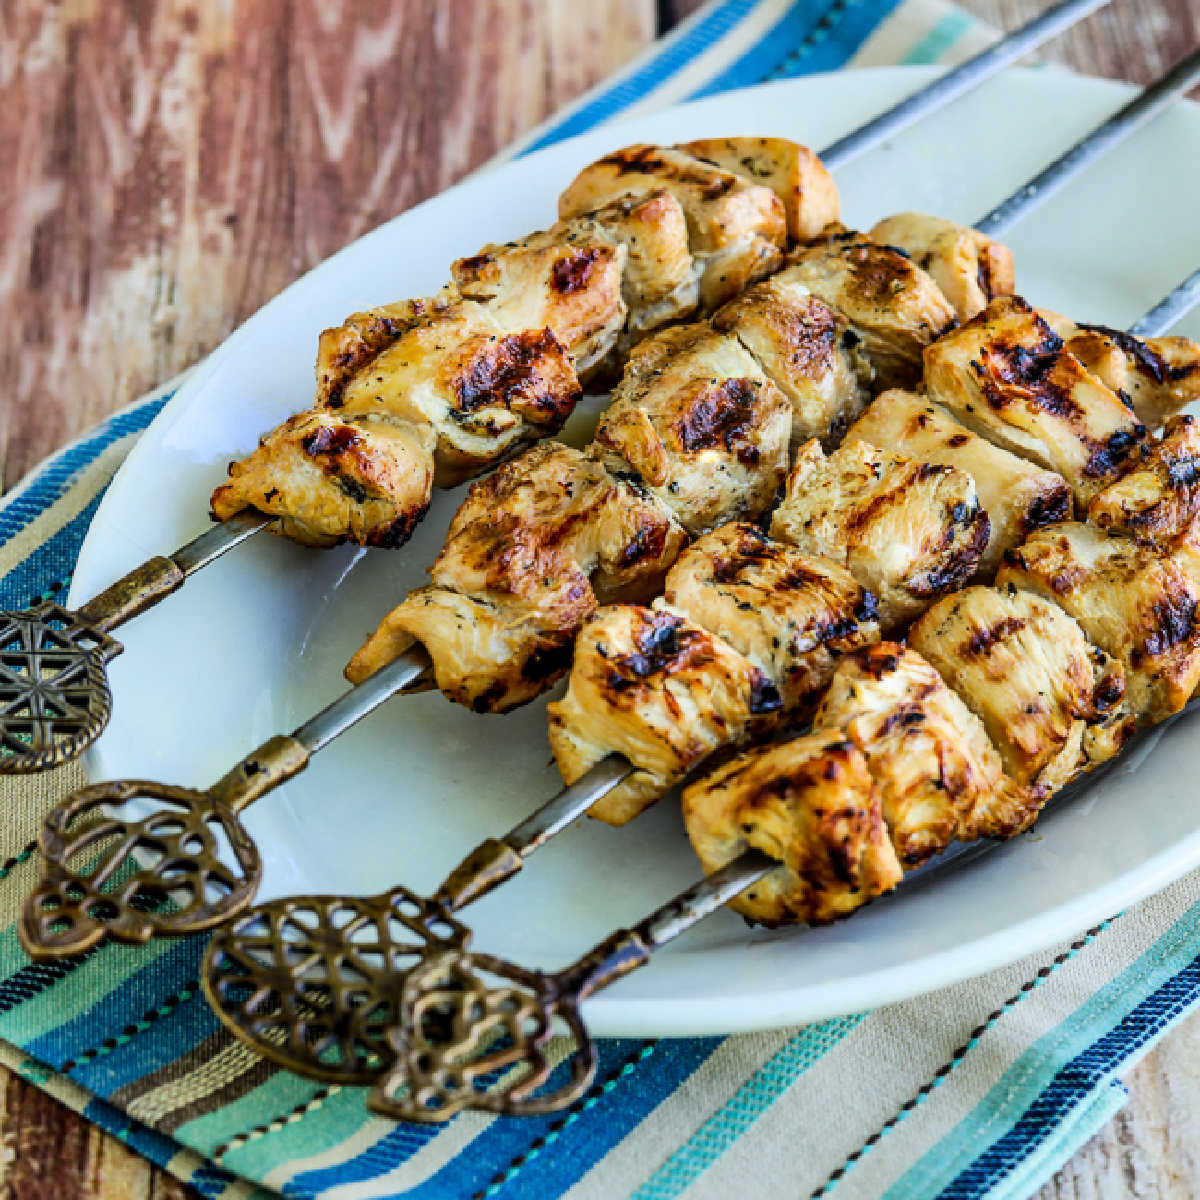 Four Turkey Kabobs shown on serving plate with napkin and decorative skewers.